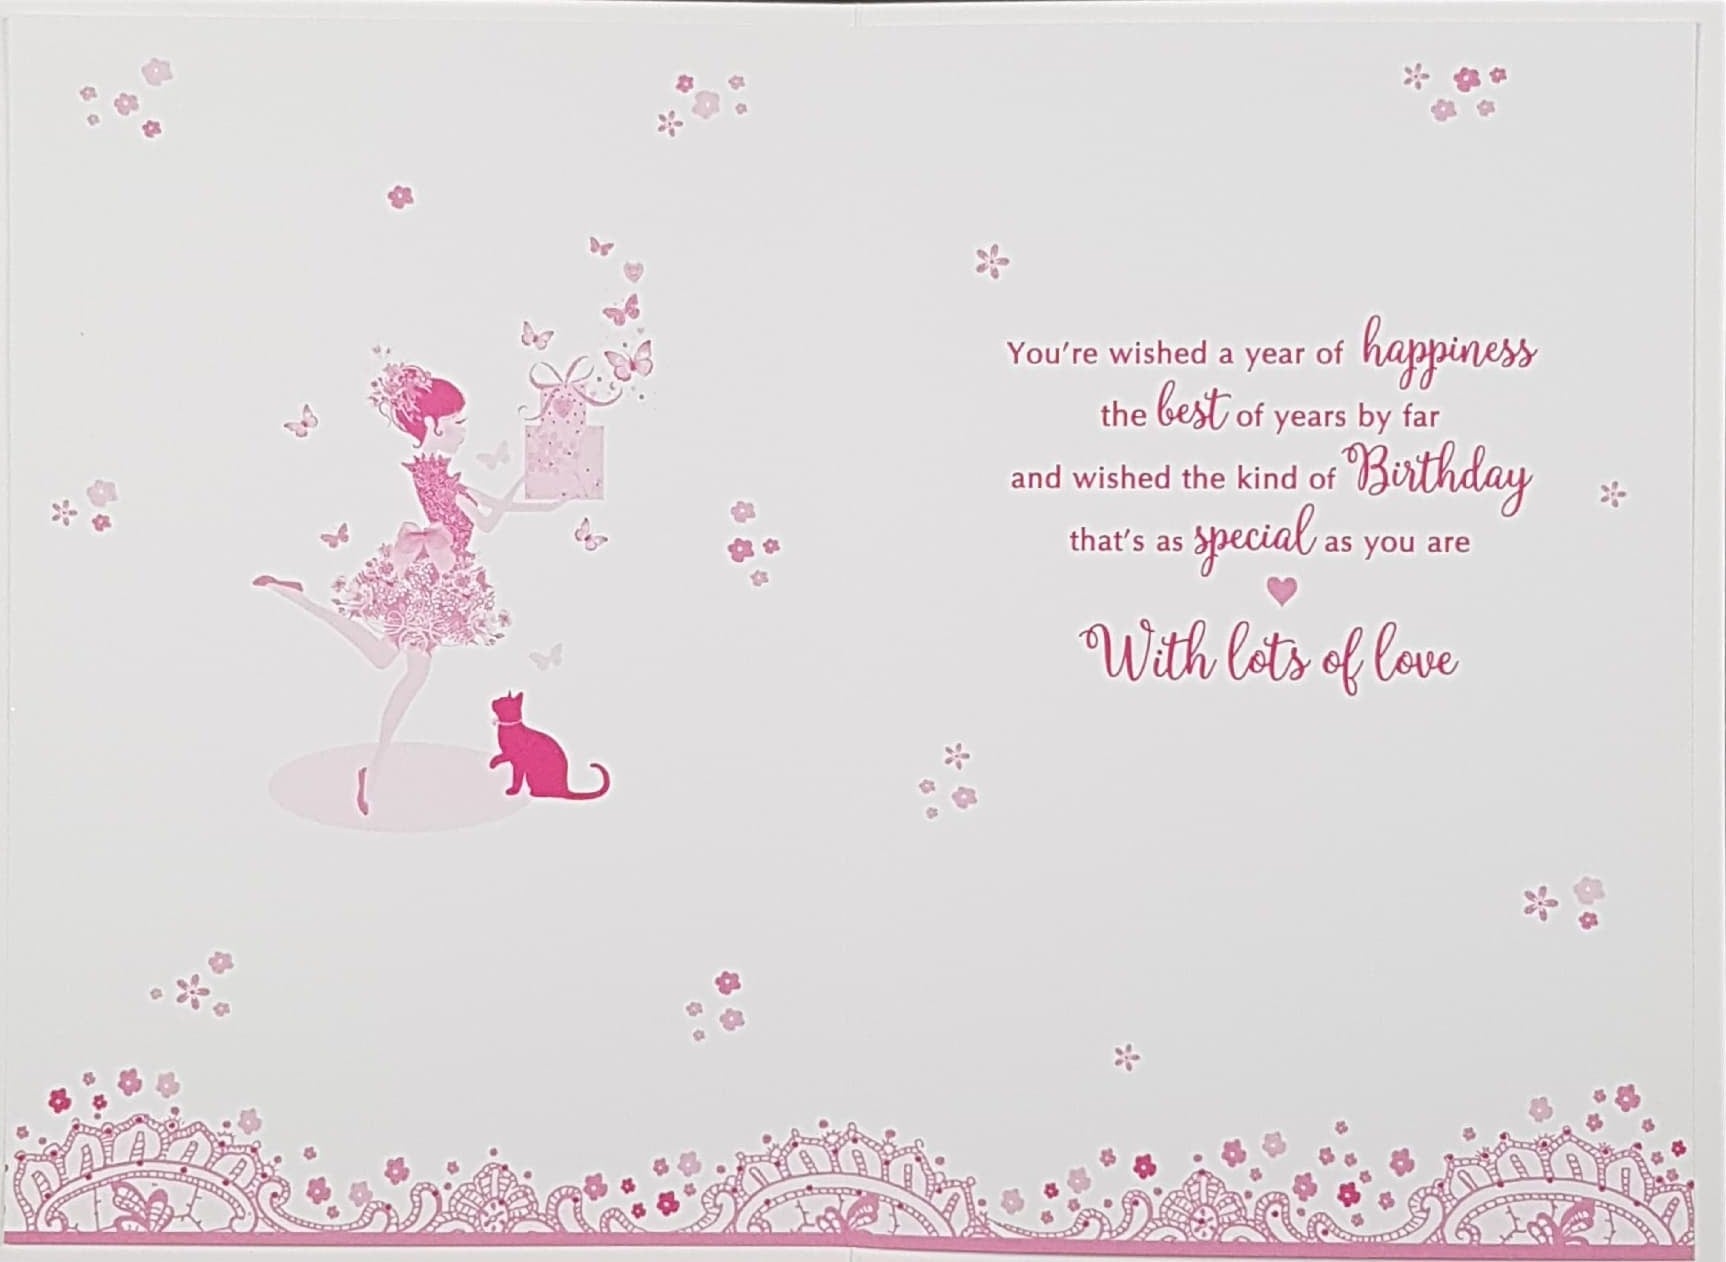 Birthday Card - Granddaughter / A Glamorous Girl In A Gorgeous Dress